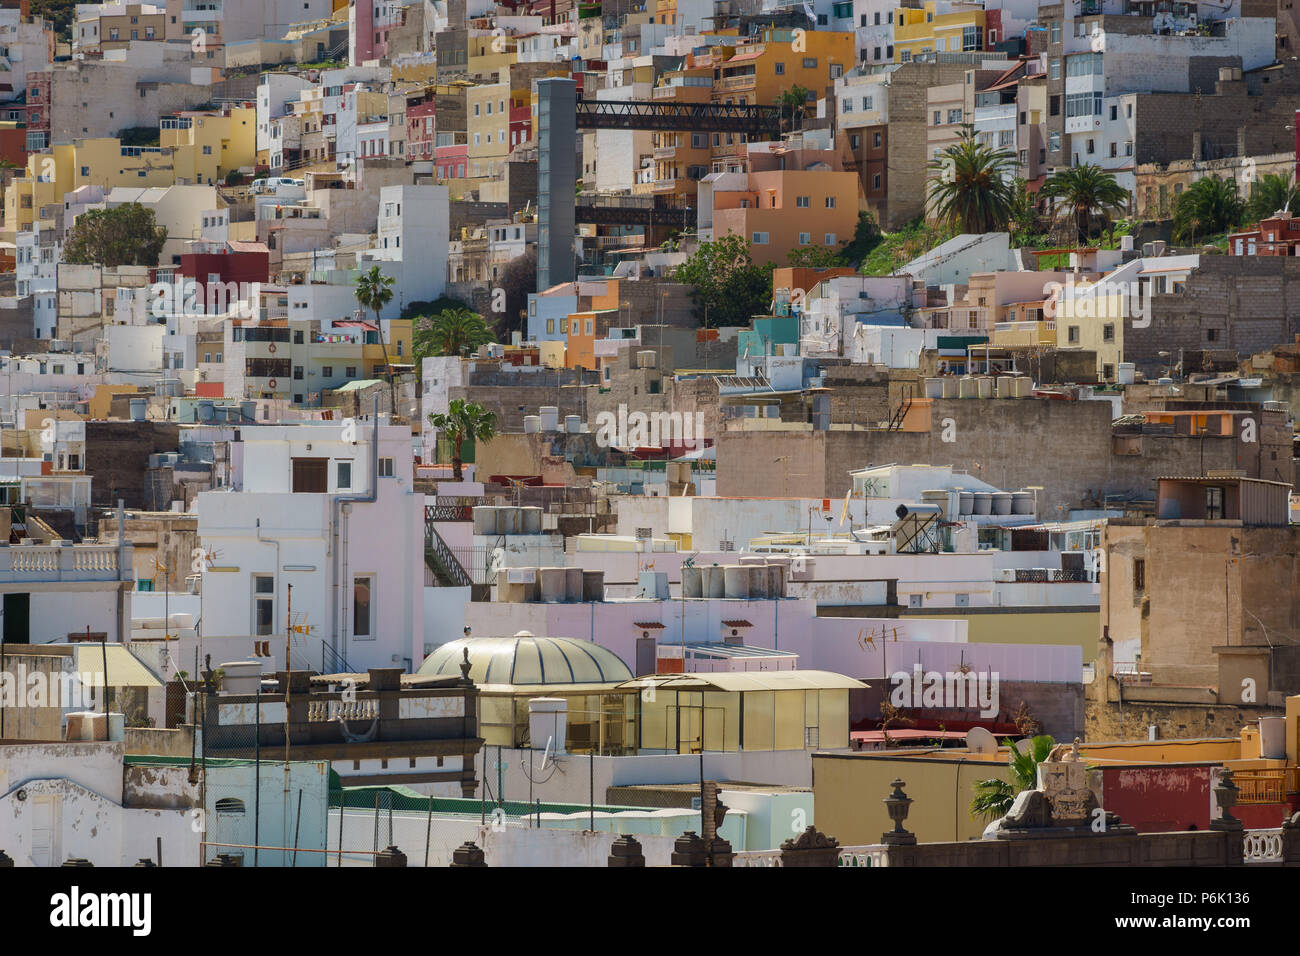 Residential area in the city of Las Palmas, Gran Canaria, Canary Islands, Spain Stock Photo